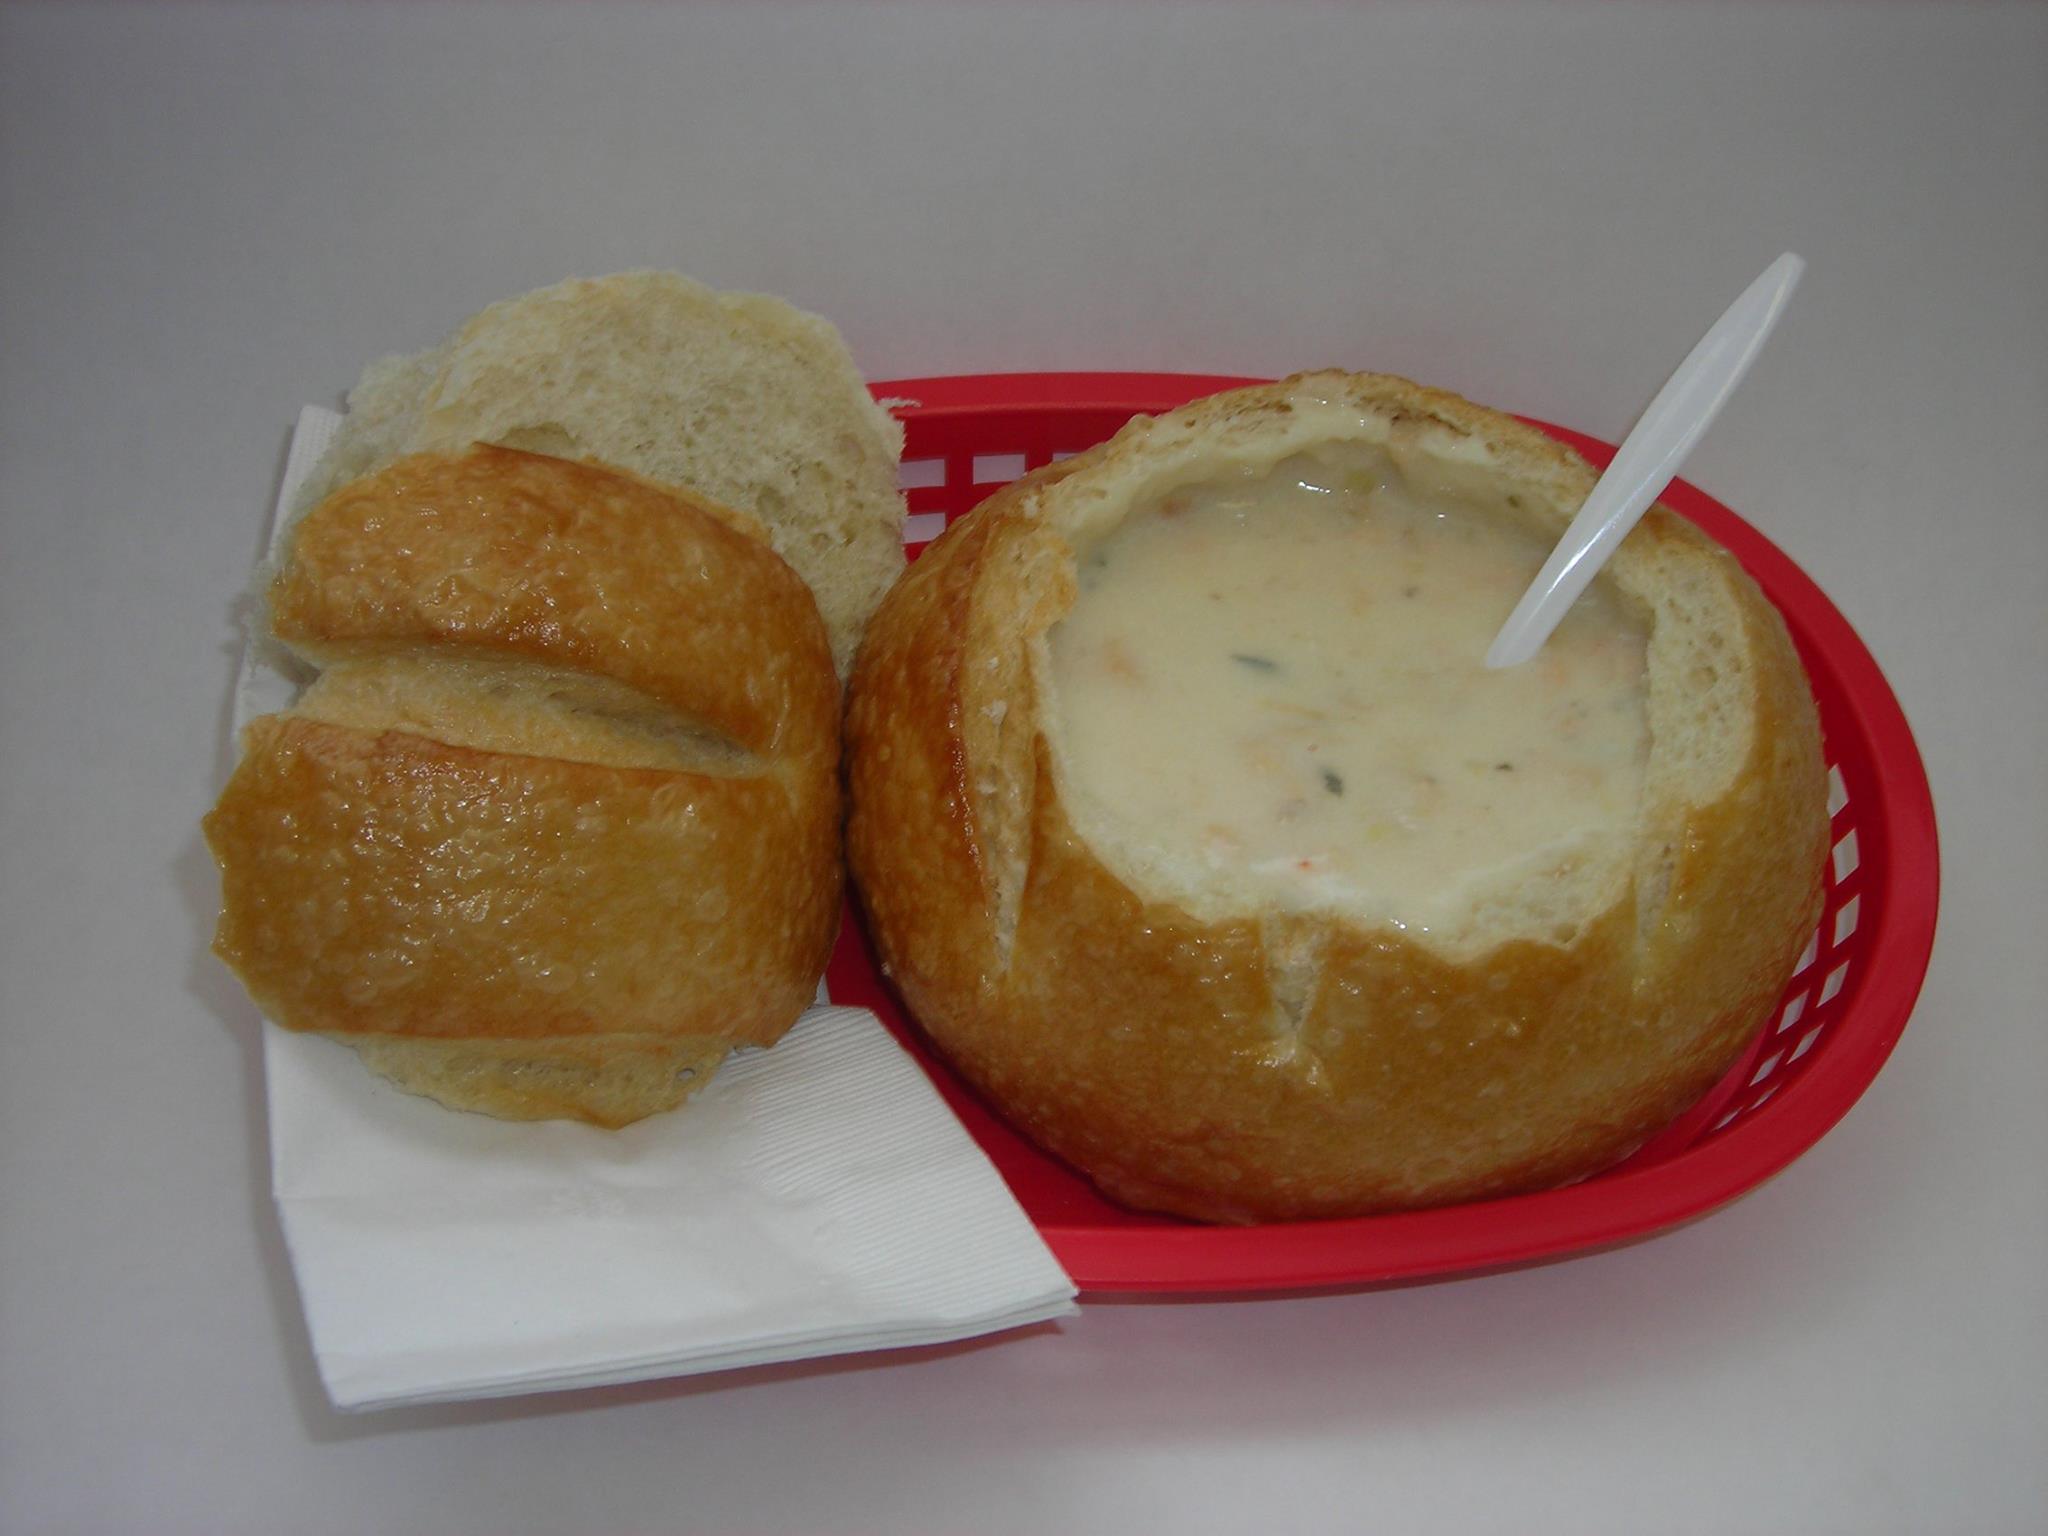 Fresh hot salmon chowder in a sour dough bread bowl at the Bandon Fish Market in Oregon.